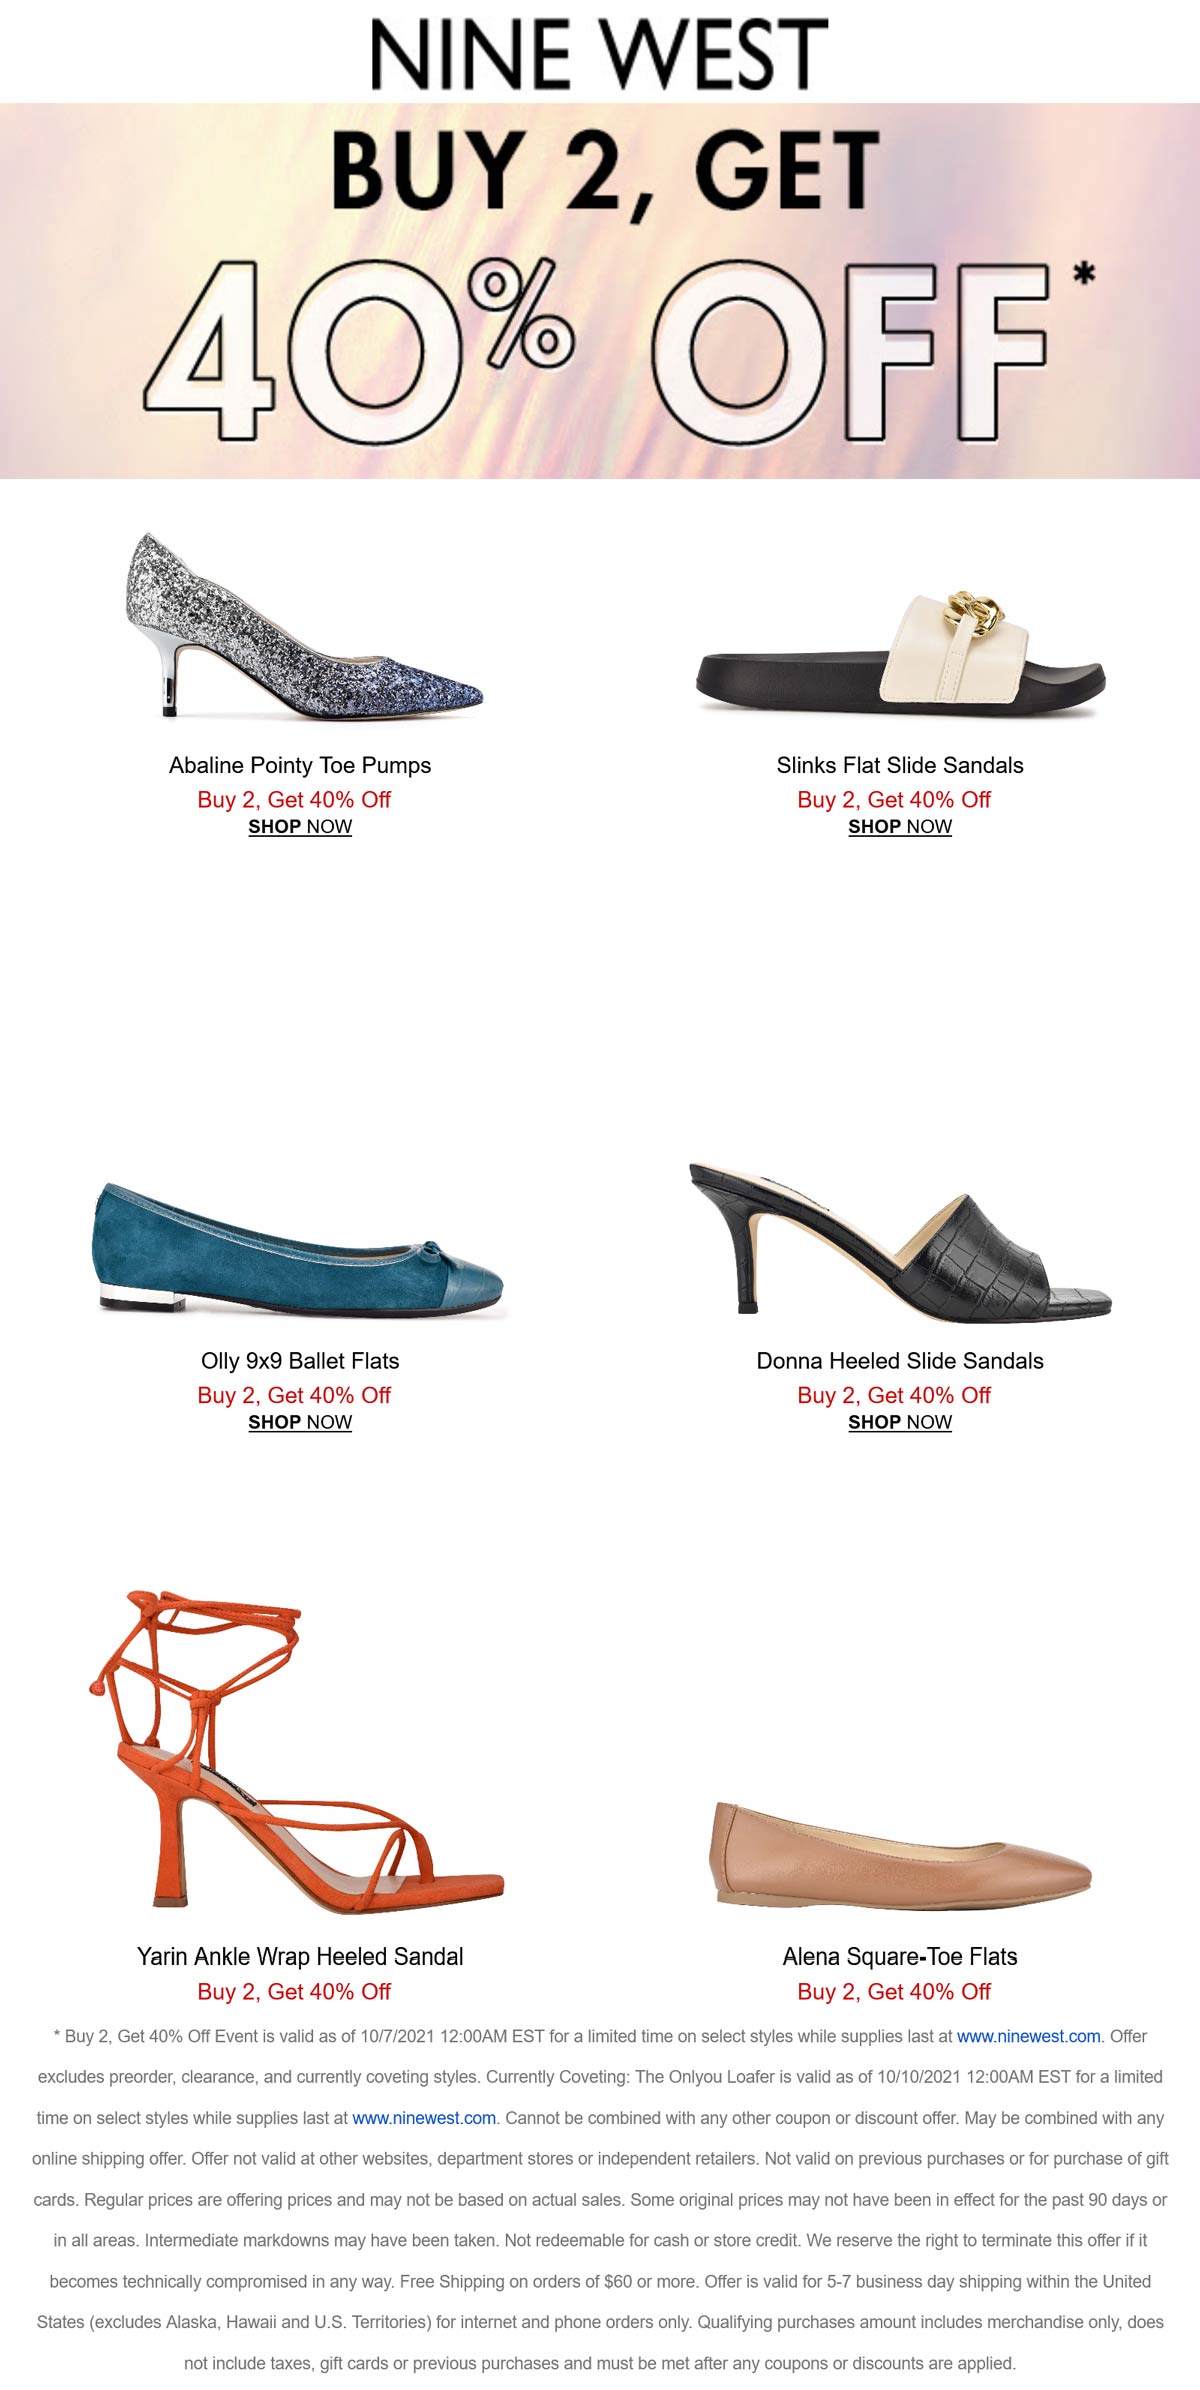 Nine West stores Coupon  40% off 2+ pair shoes today at Nine West #ninewest 